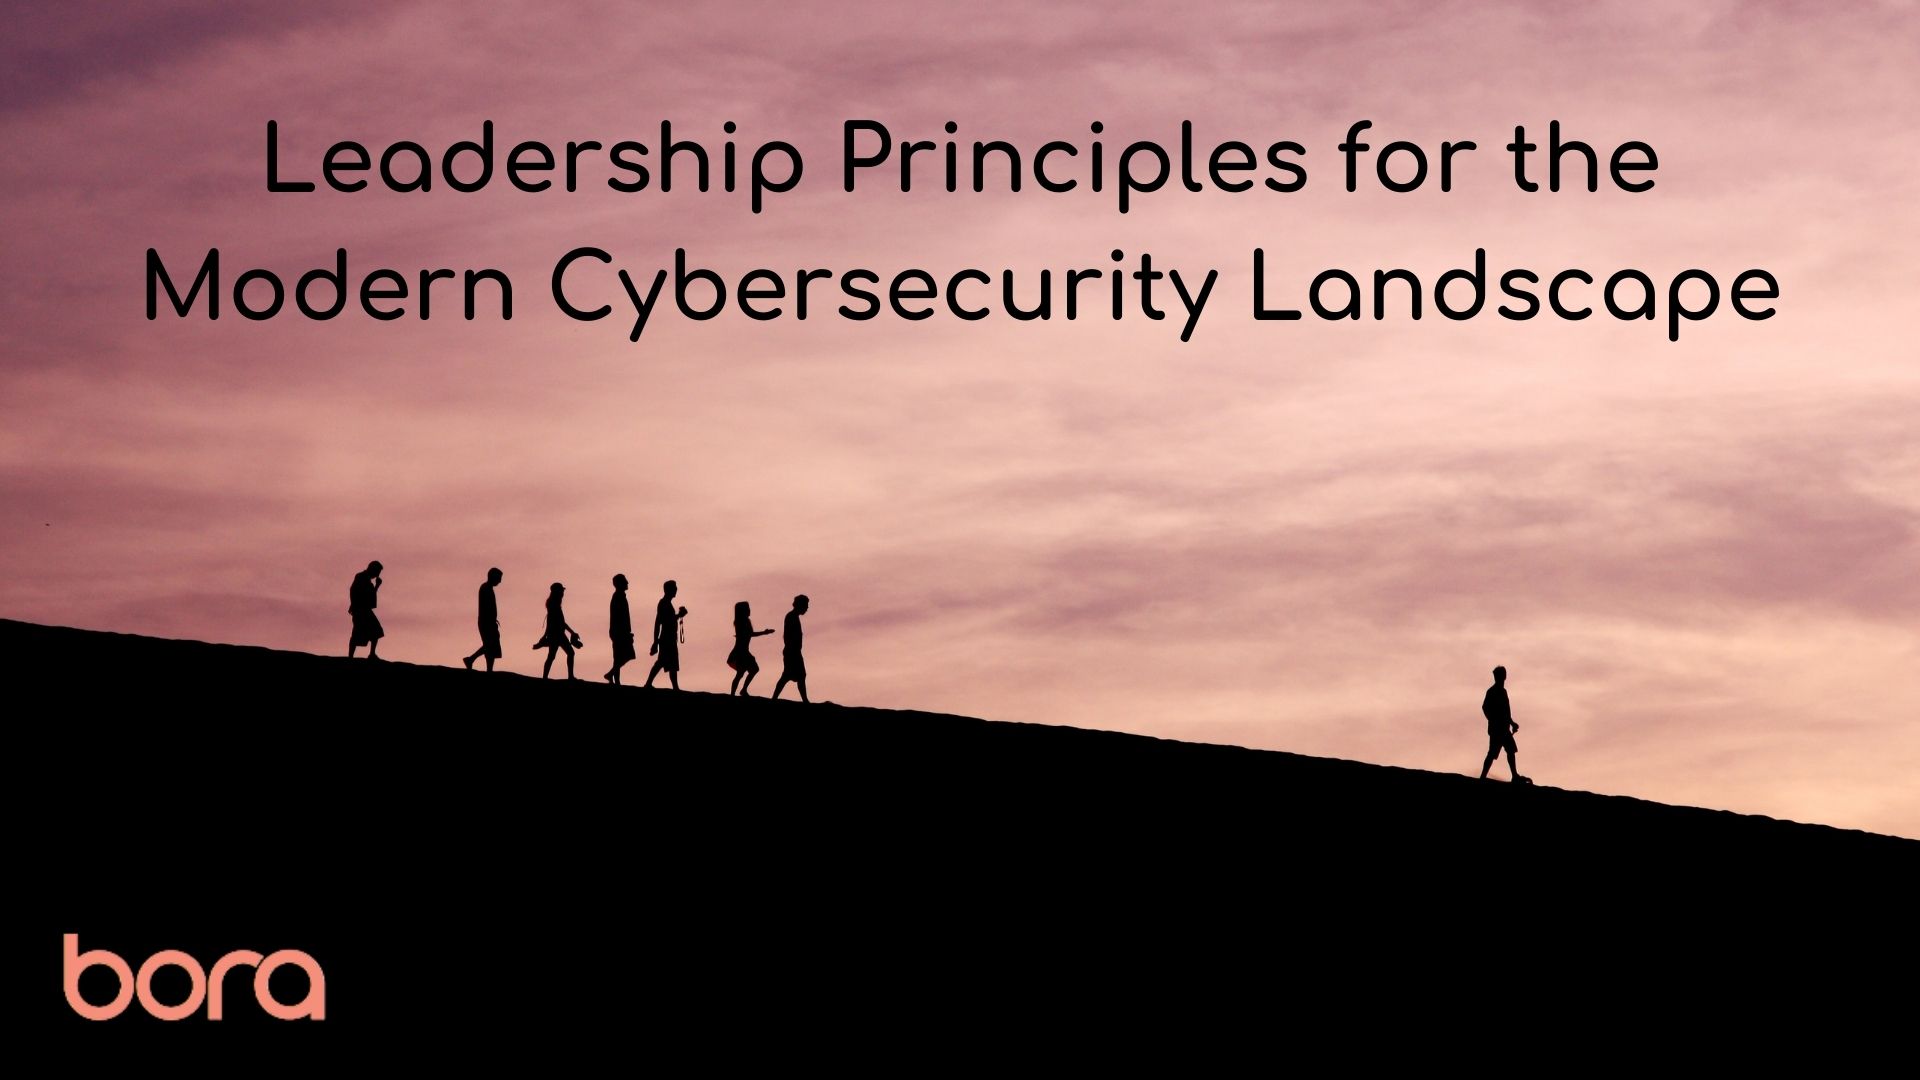 Leadership Principles for the Modern Cybersecurity Landscape